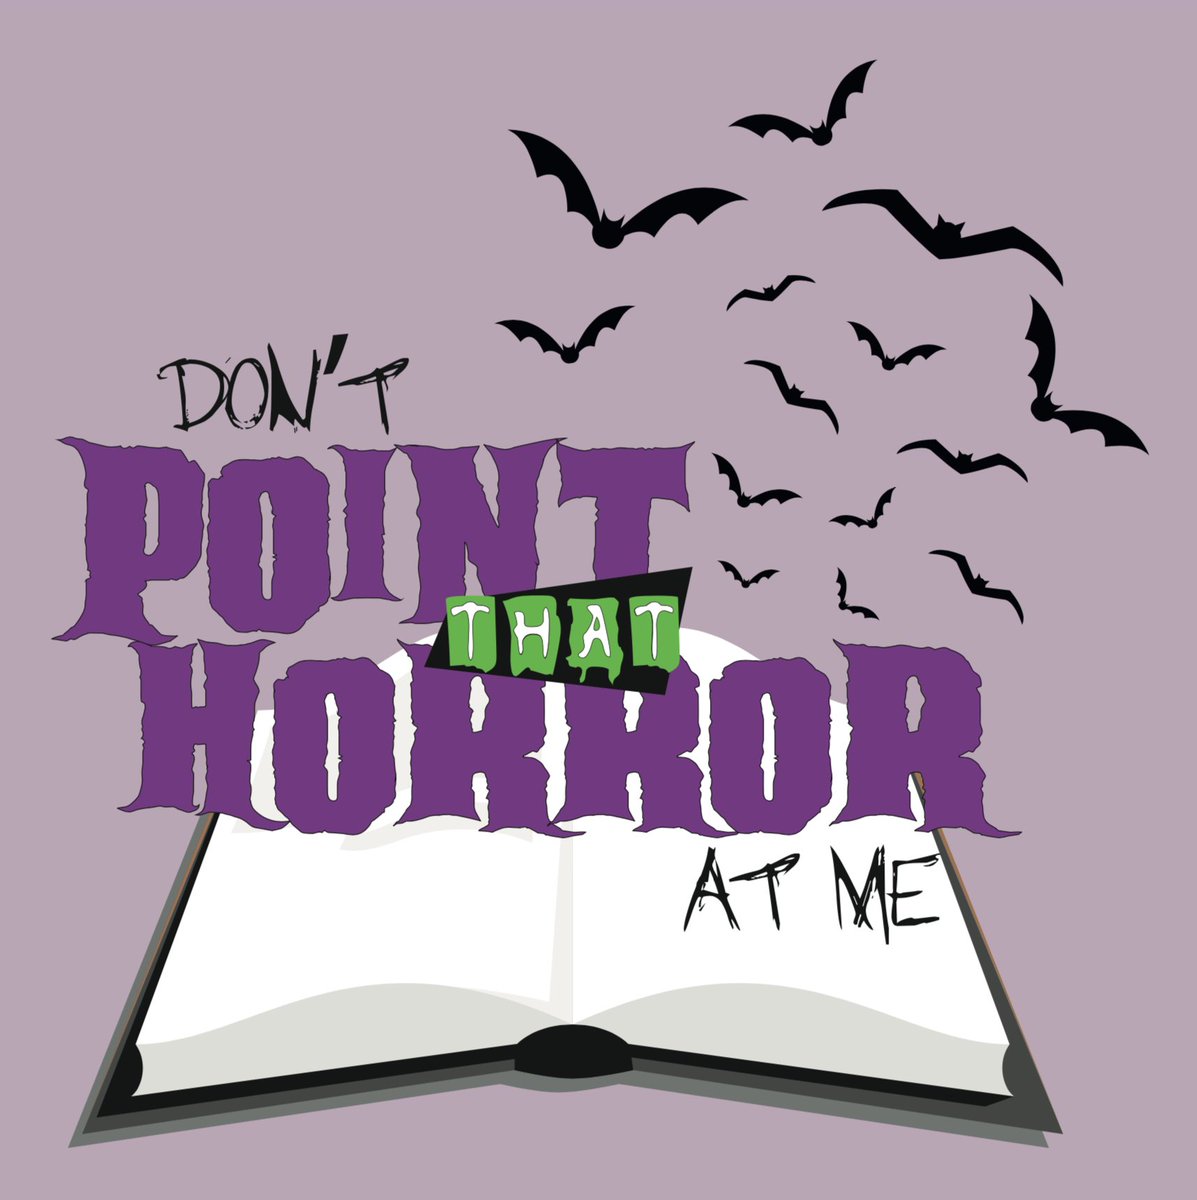 DON’T POINT THAT HORROR AT MEHorror fiction meets 90s nostalgia in this brilliant and hilarious podcast from  @bunnydarke &  @LipglossJill!  @PointHorrorPod